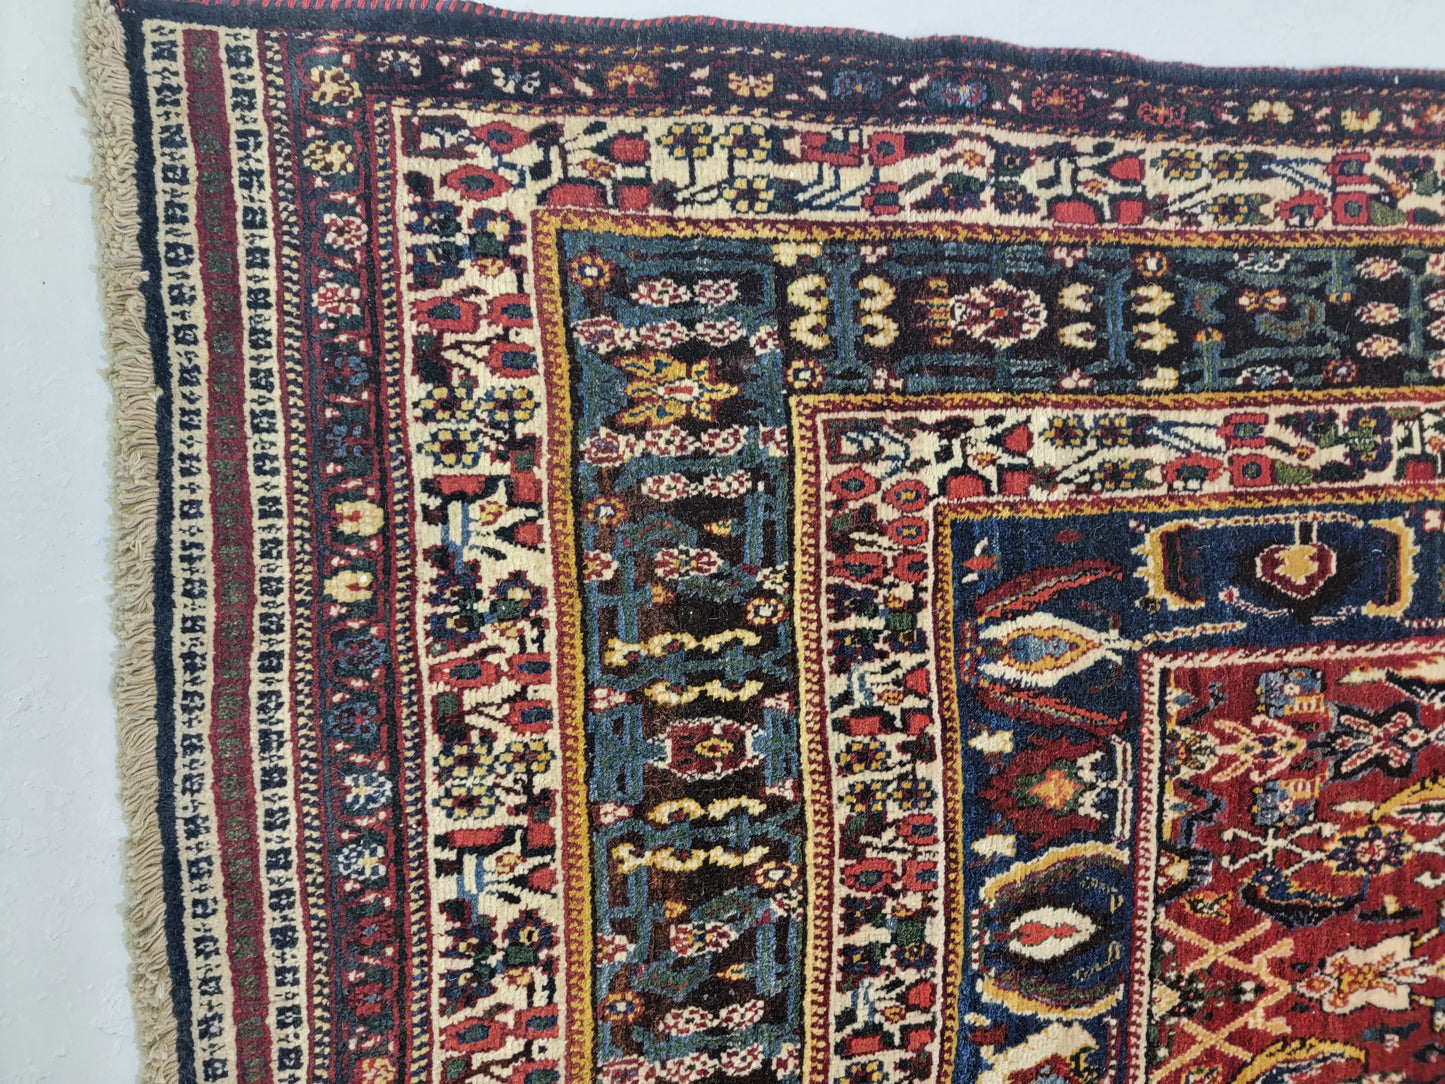 Antique Hand-Knotted Wool Area Rug Ghashghai Mahi Extremely Rare 11'7" x 17'